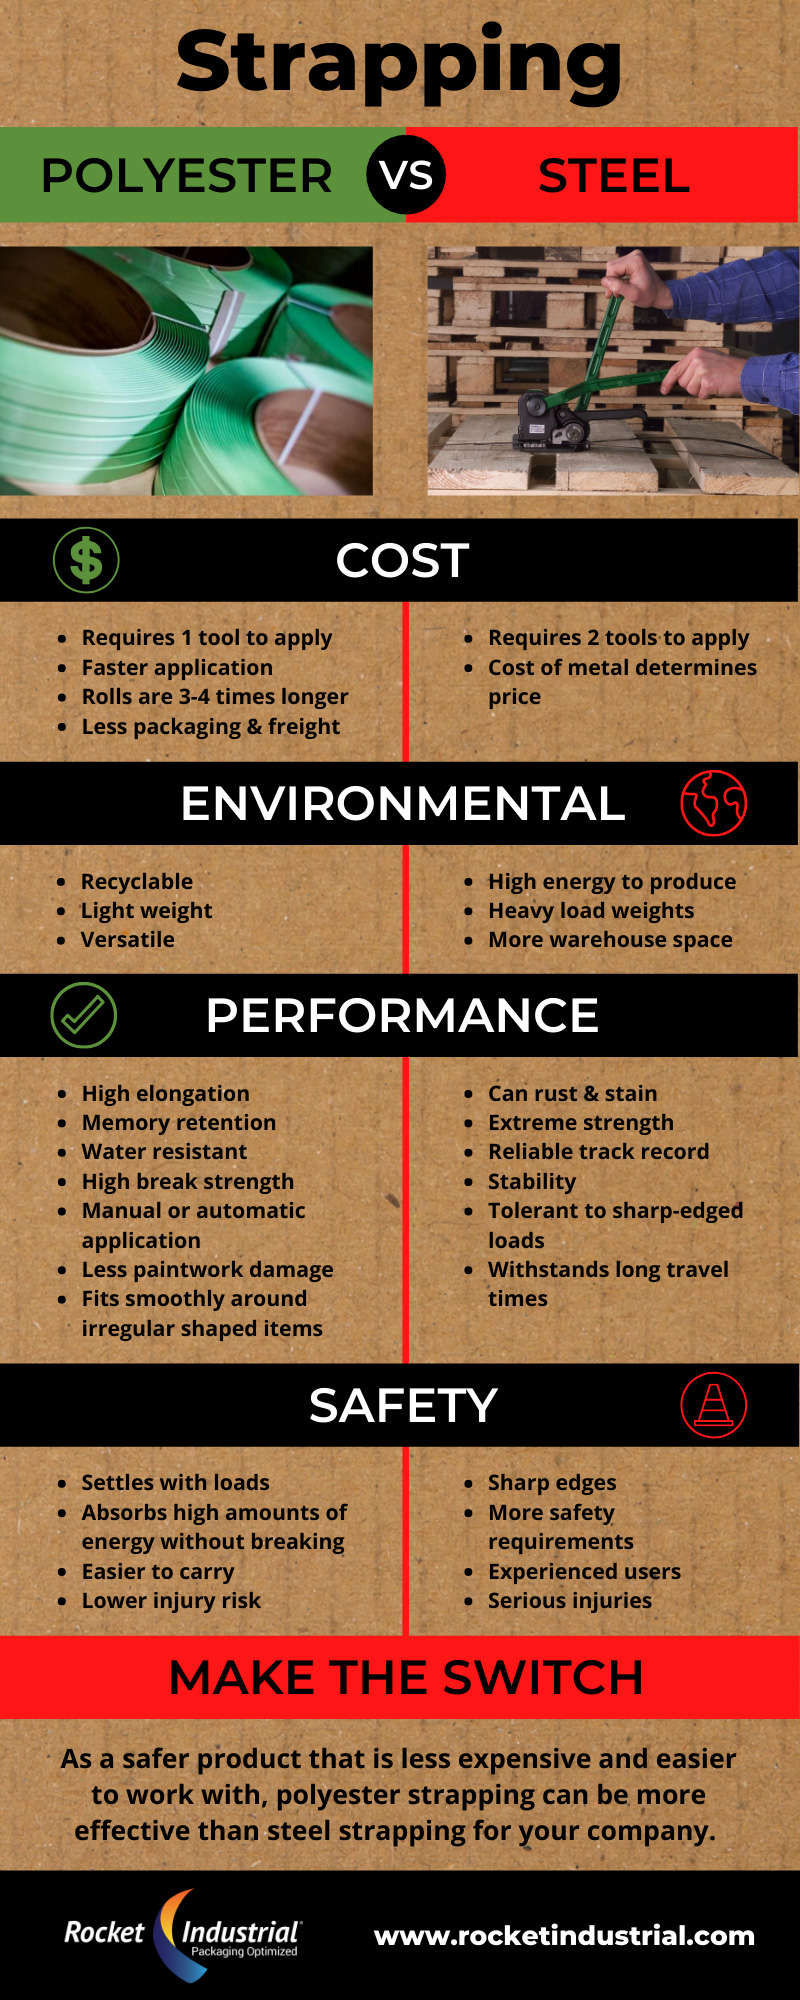 Steel vs Polyester Strapping [Infographic]